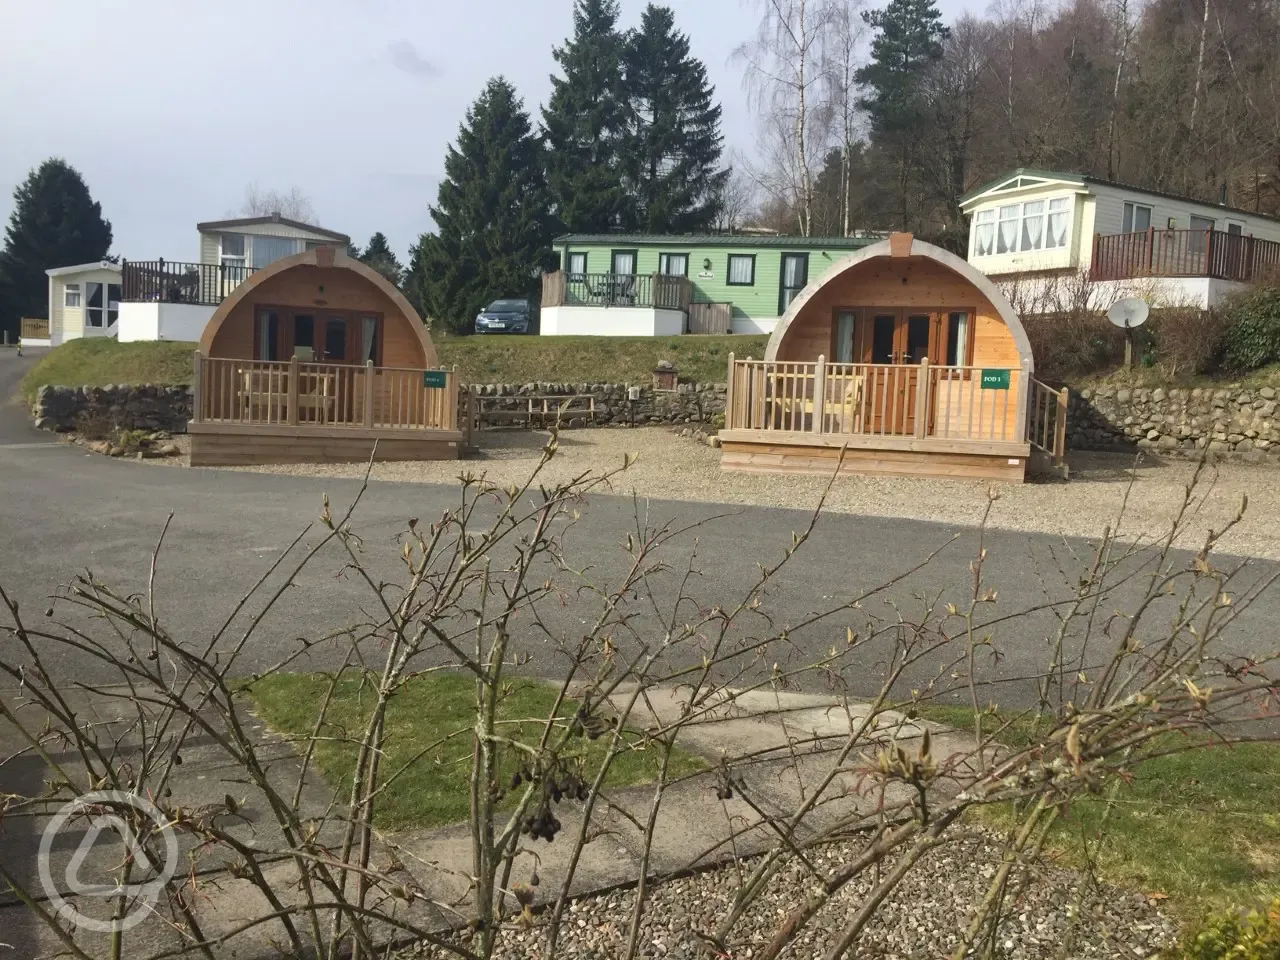 Camping Pods at Corriefodly